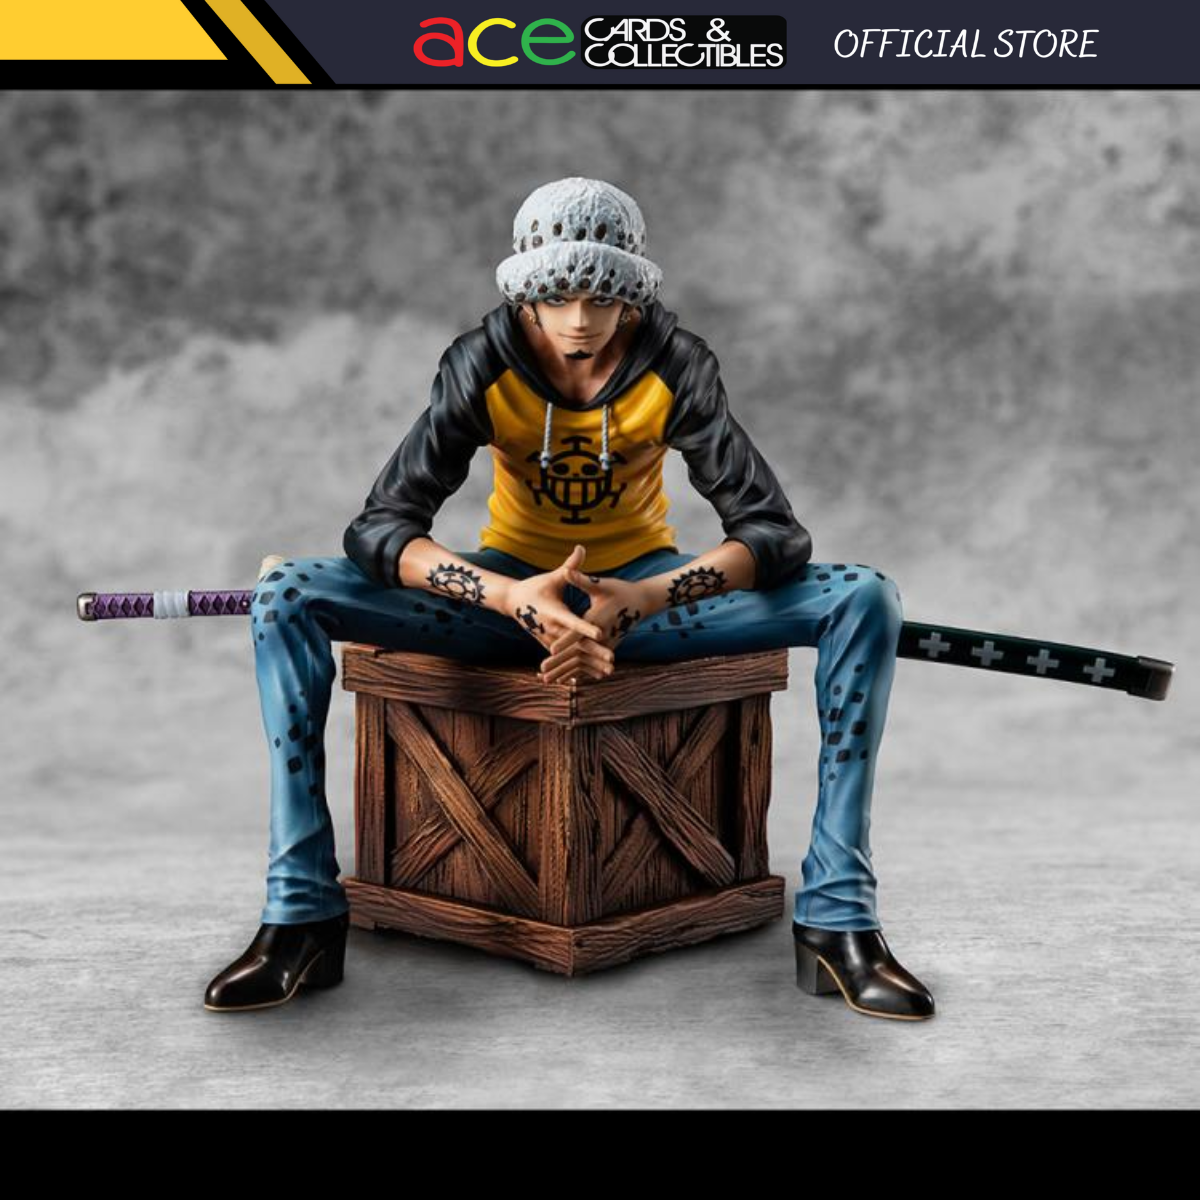 Portrait Of Pirates One Piece Playback Memories "Trafalgar. Law"-MegaHouse-Ace Cards & Collectibles